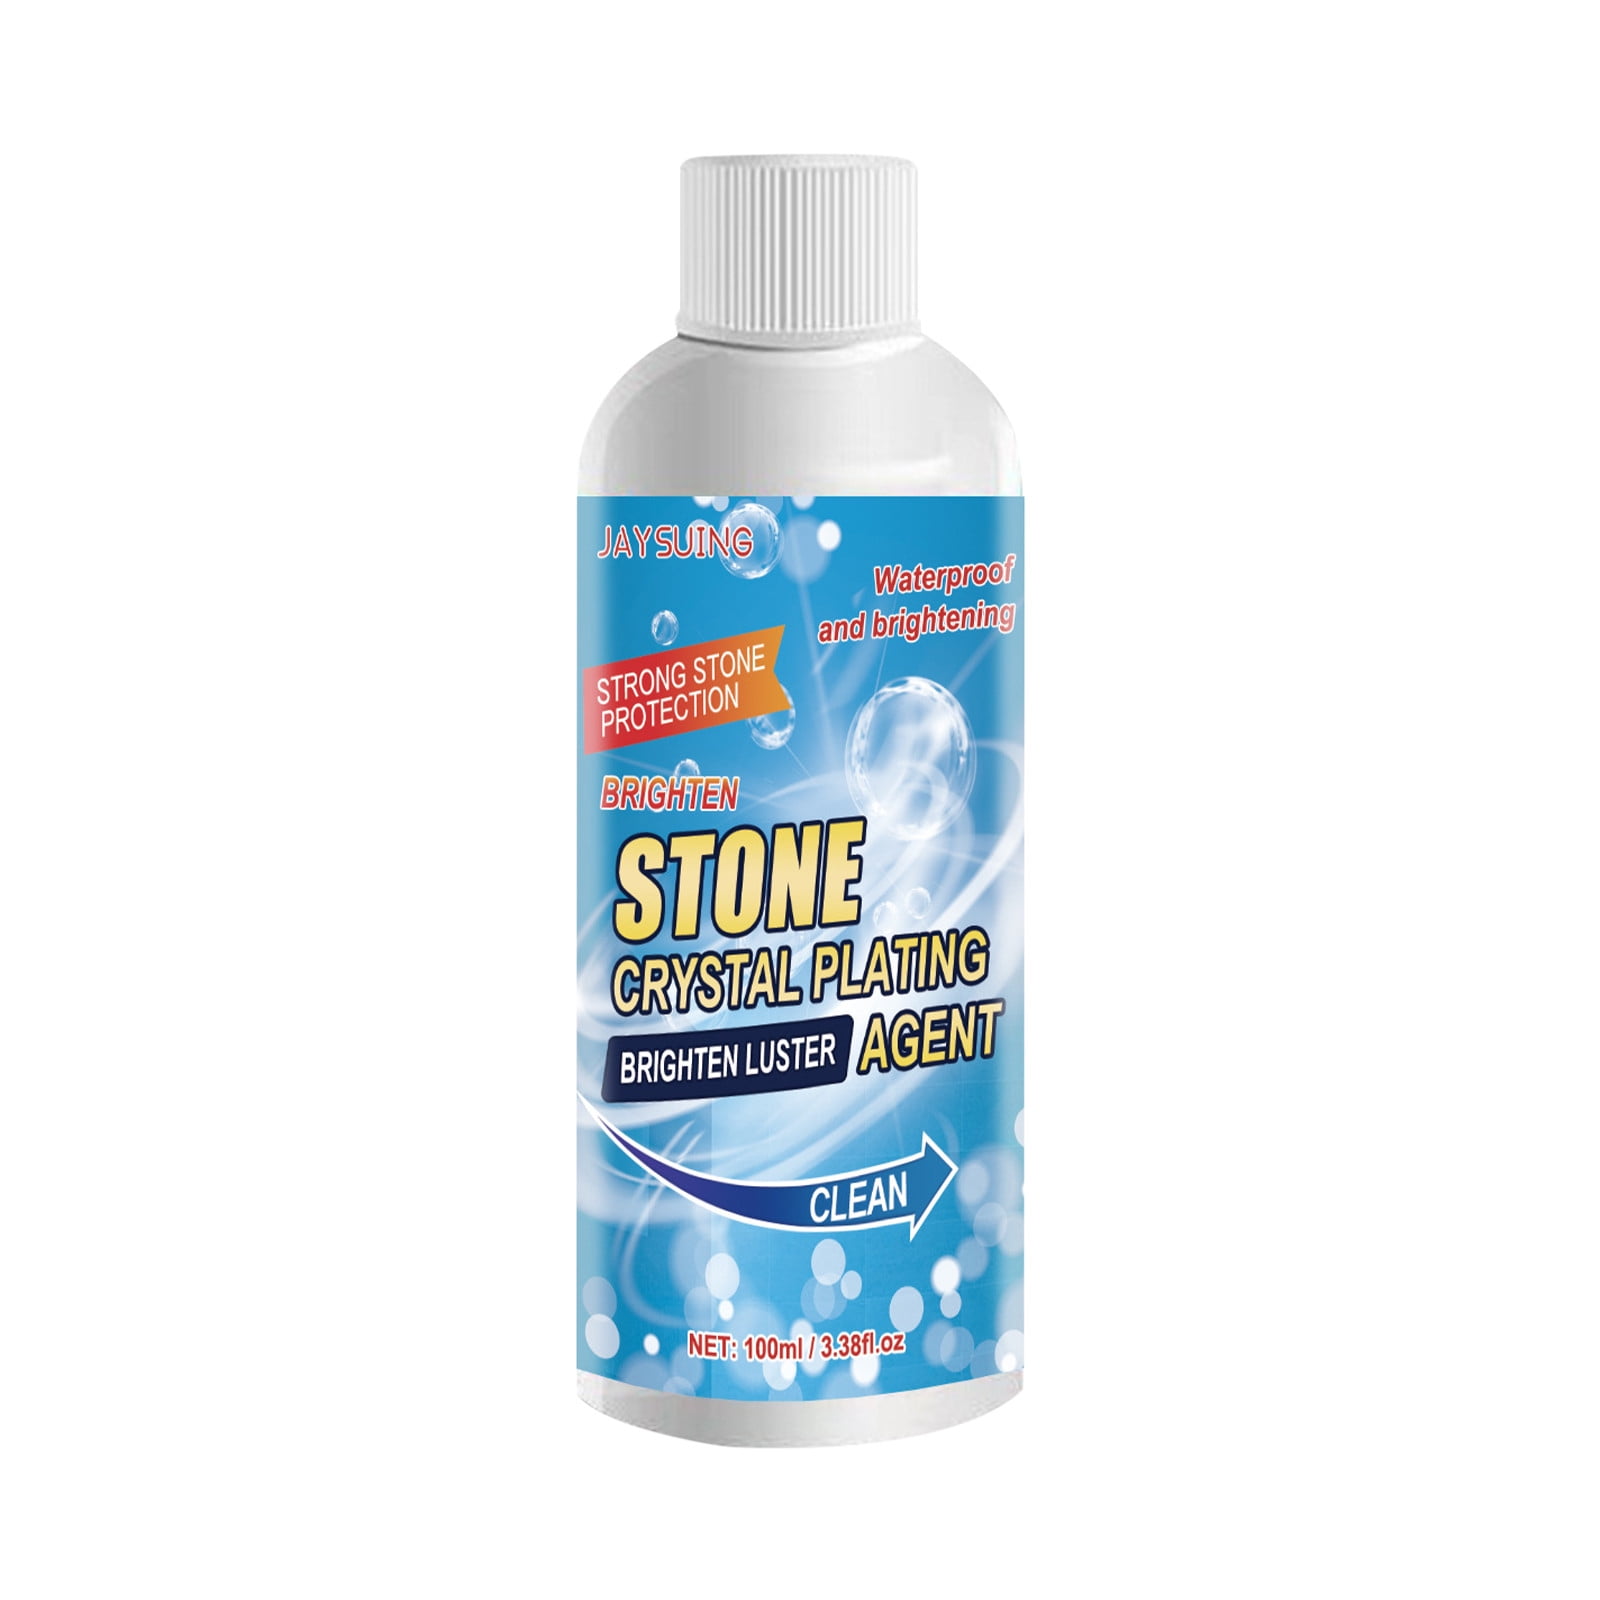 Pompotops Up to 50% off, Stone Crystal Plating Agent, Kitchen Stone Tile  Countertop, Quartz Stone Scratch Repair, Cleaning, Stains, Brightener  100ml